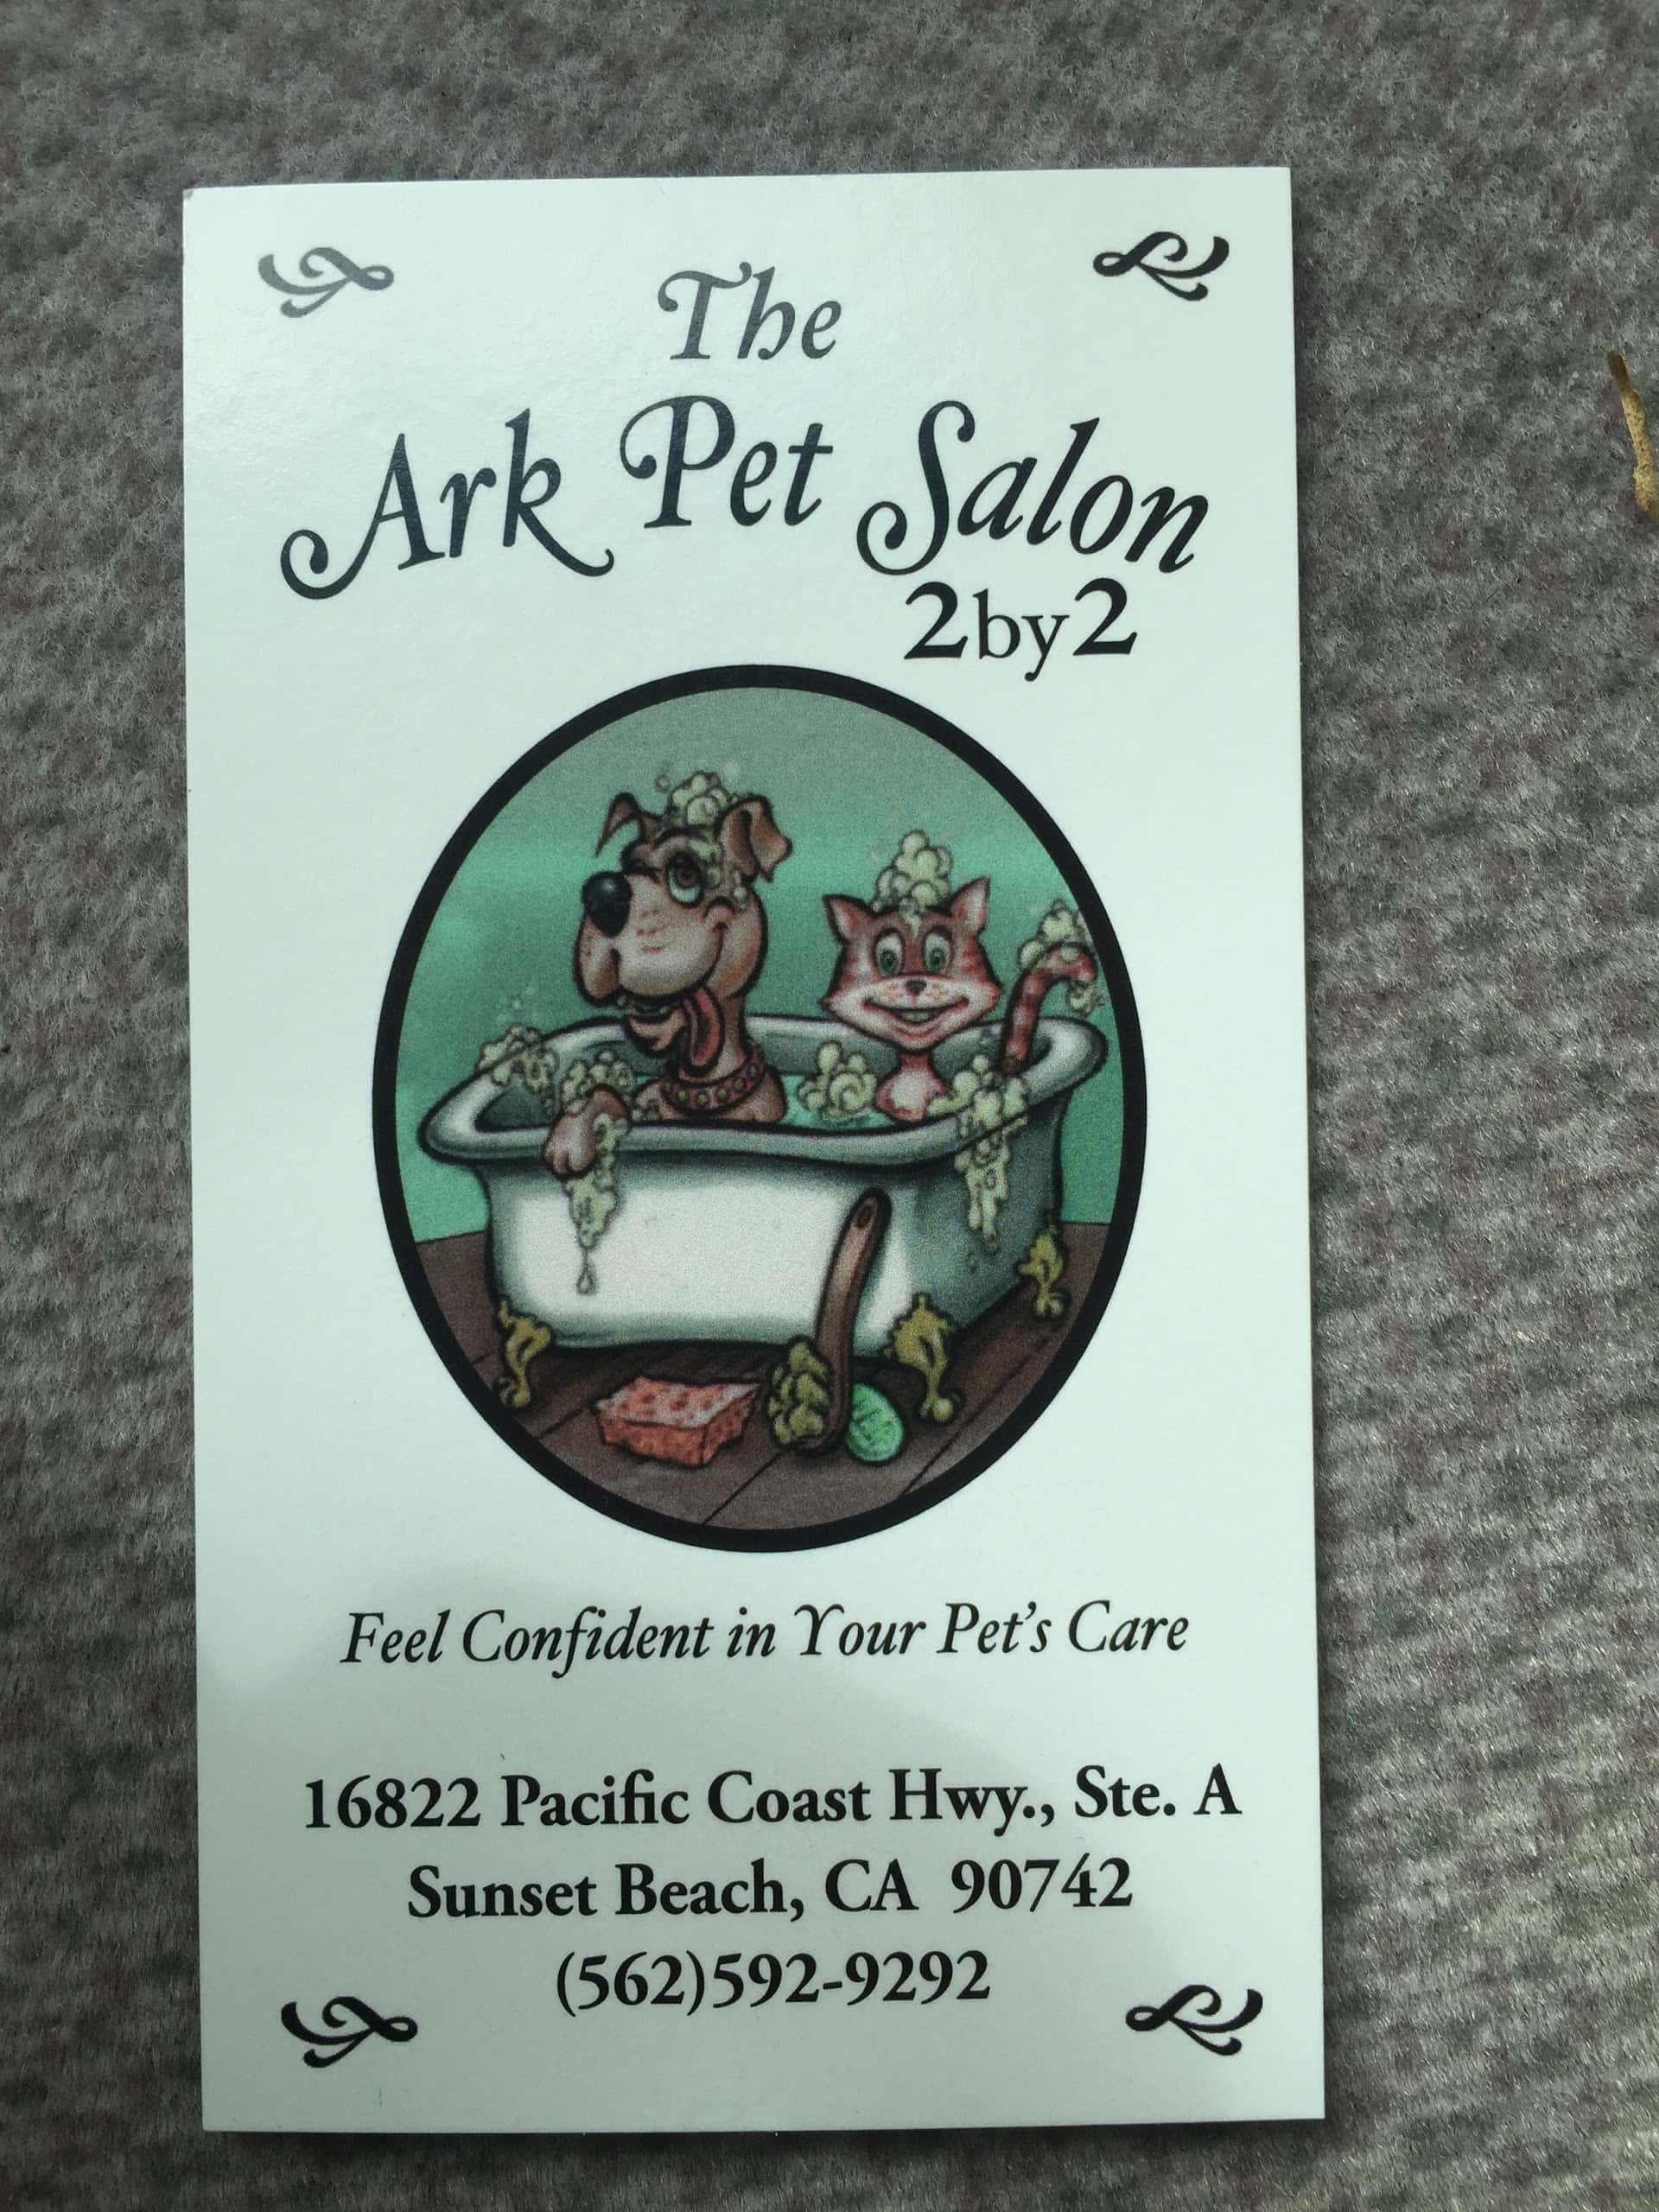 Ark Pet Salon 2by2 - Sunset Beach, CA, US, all paws grooming